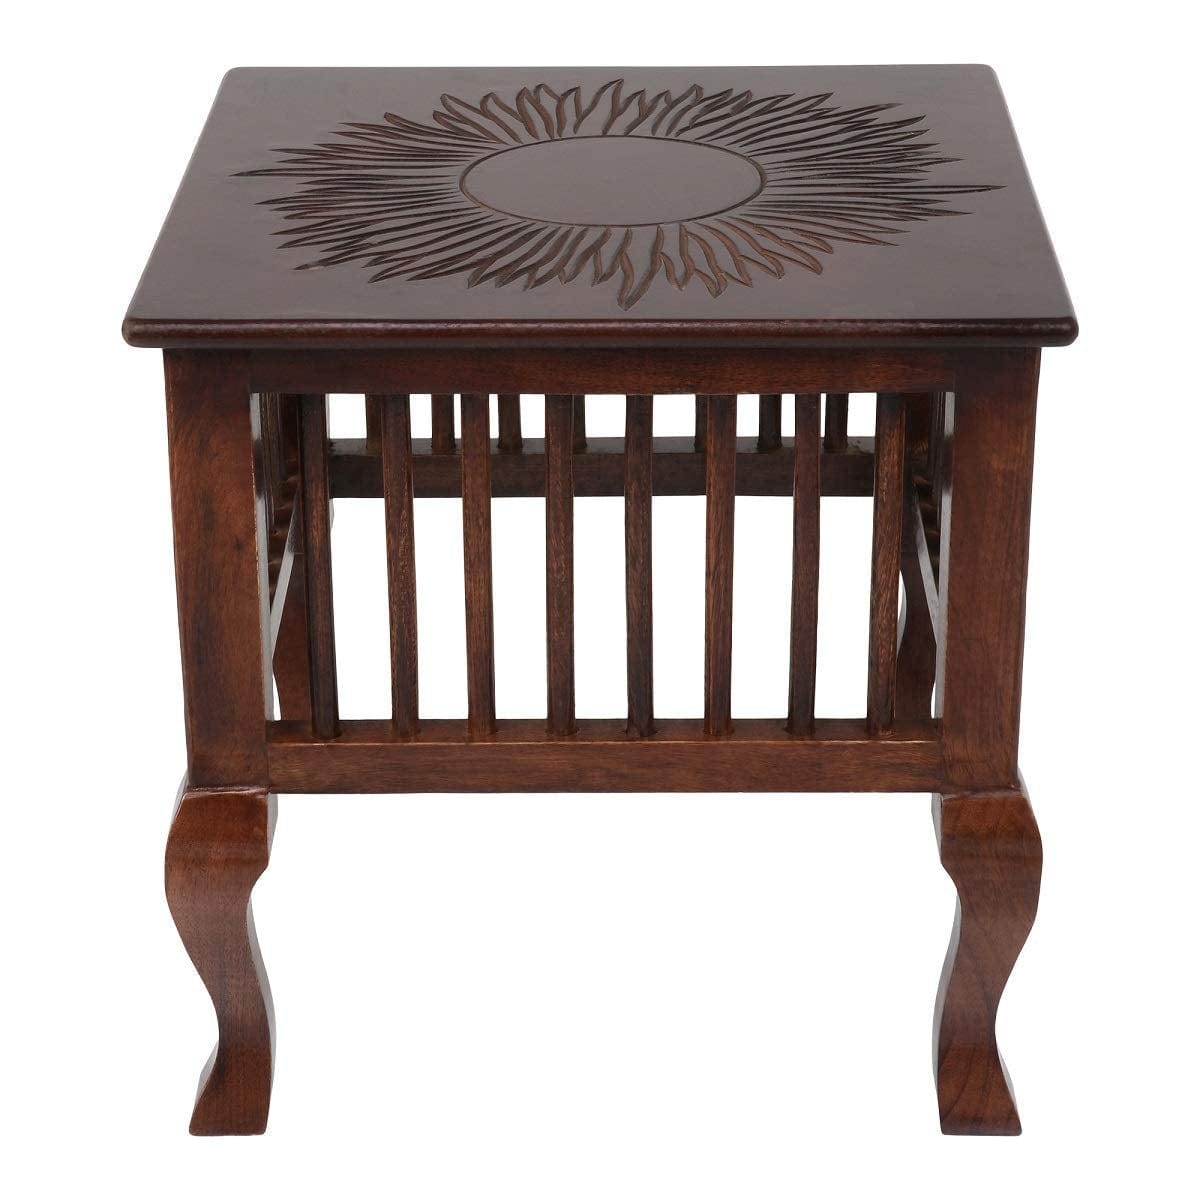 Mango Wood Walnut Finish Handmade Carving Classic Side Table for Living Room